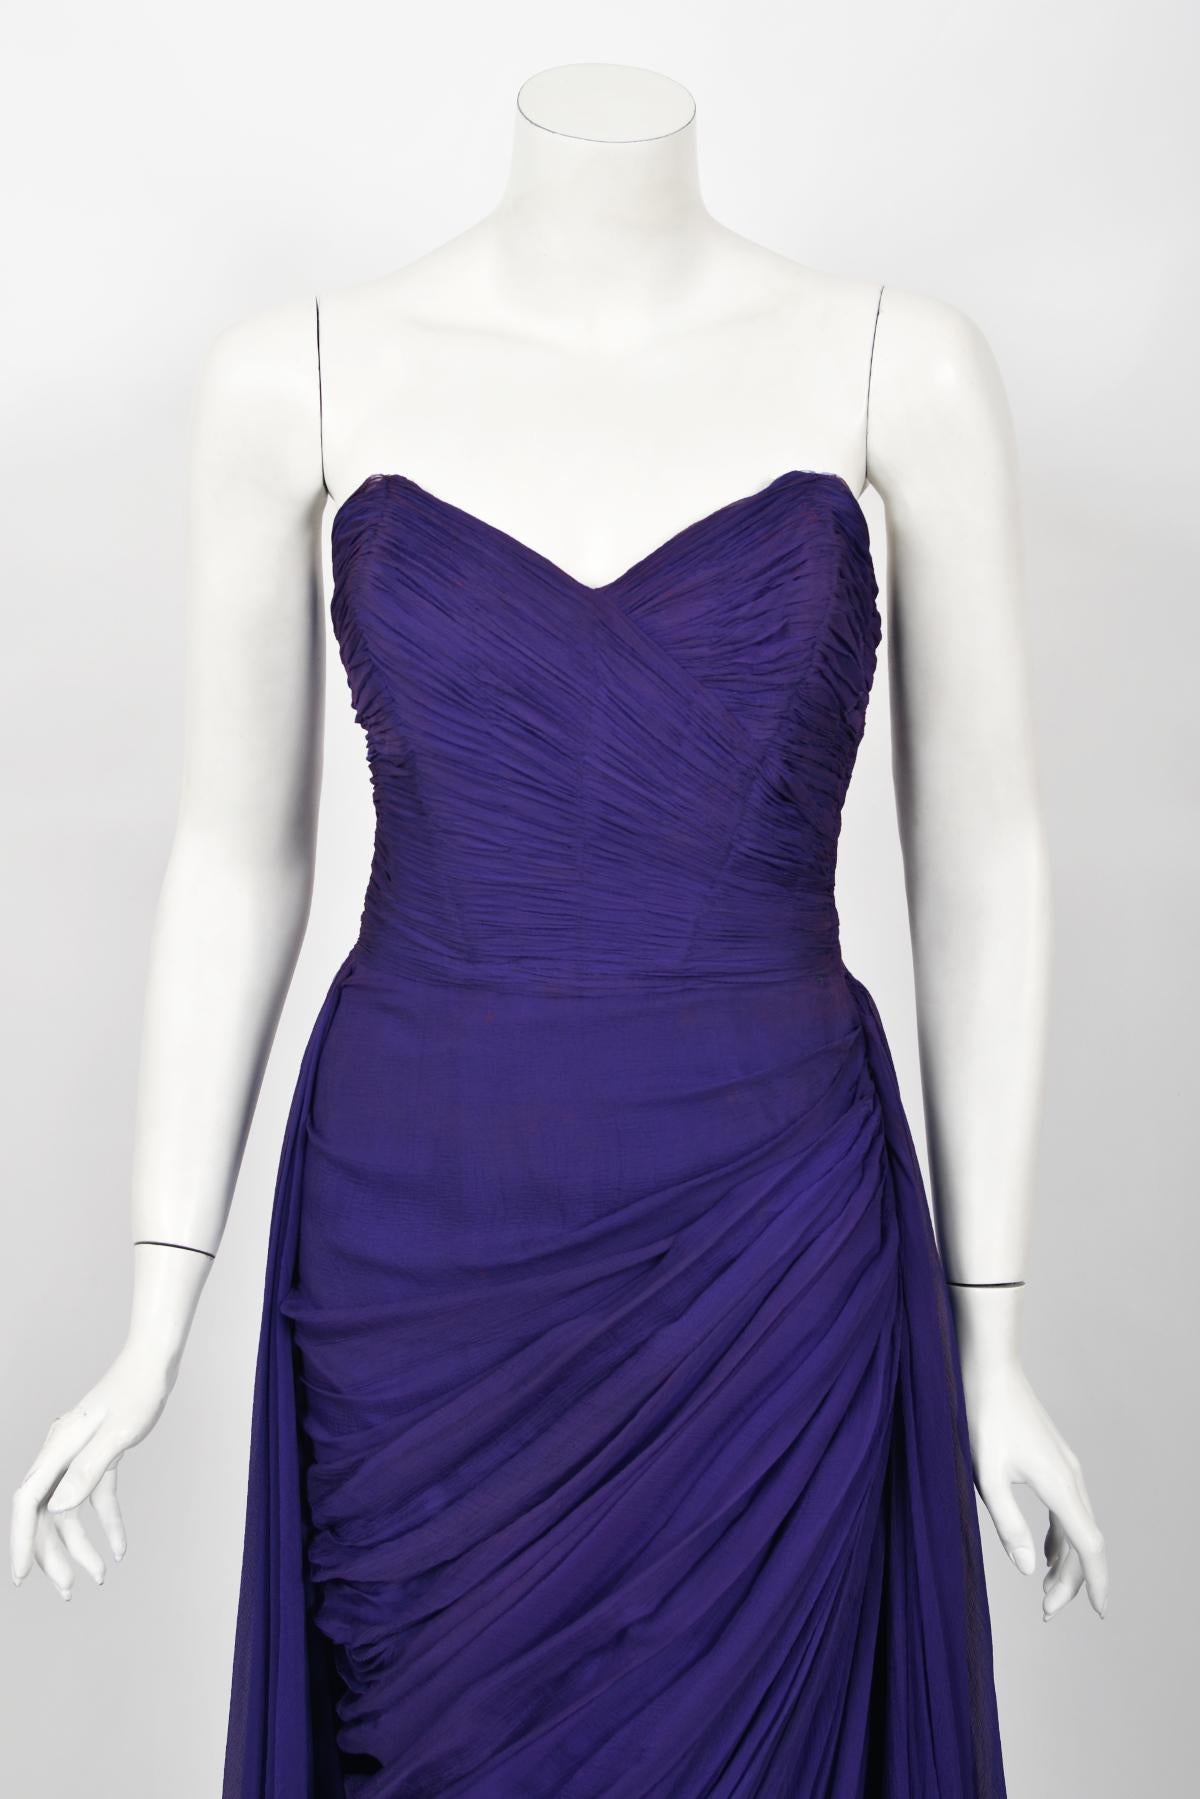 Vintage 1950s Curiel Couture Pleated Purple Silk Chiffon Strapless Goddess Gown  For Sale 1